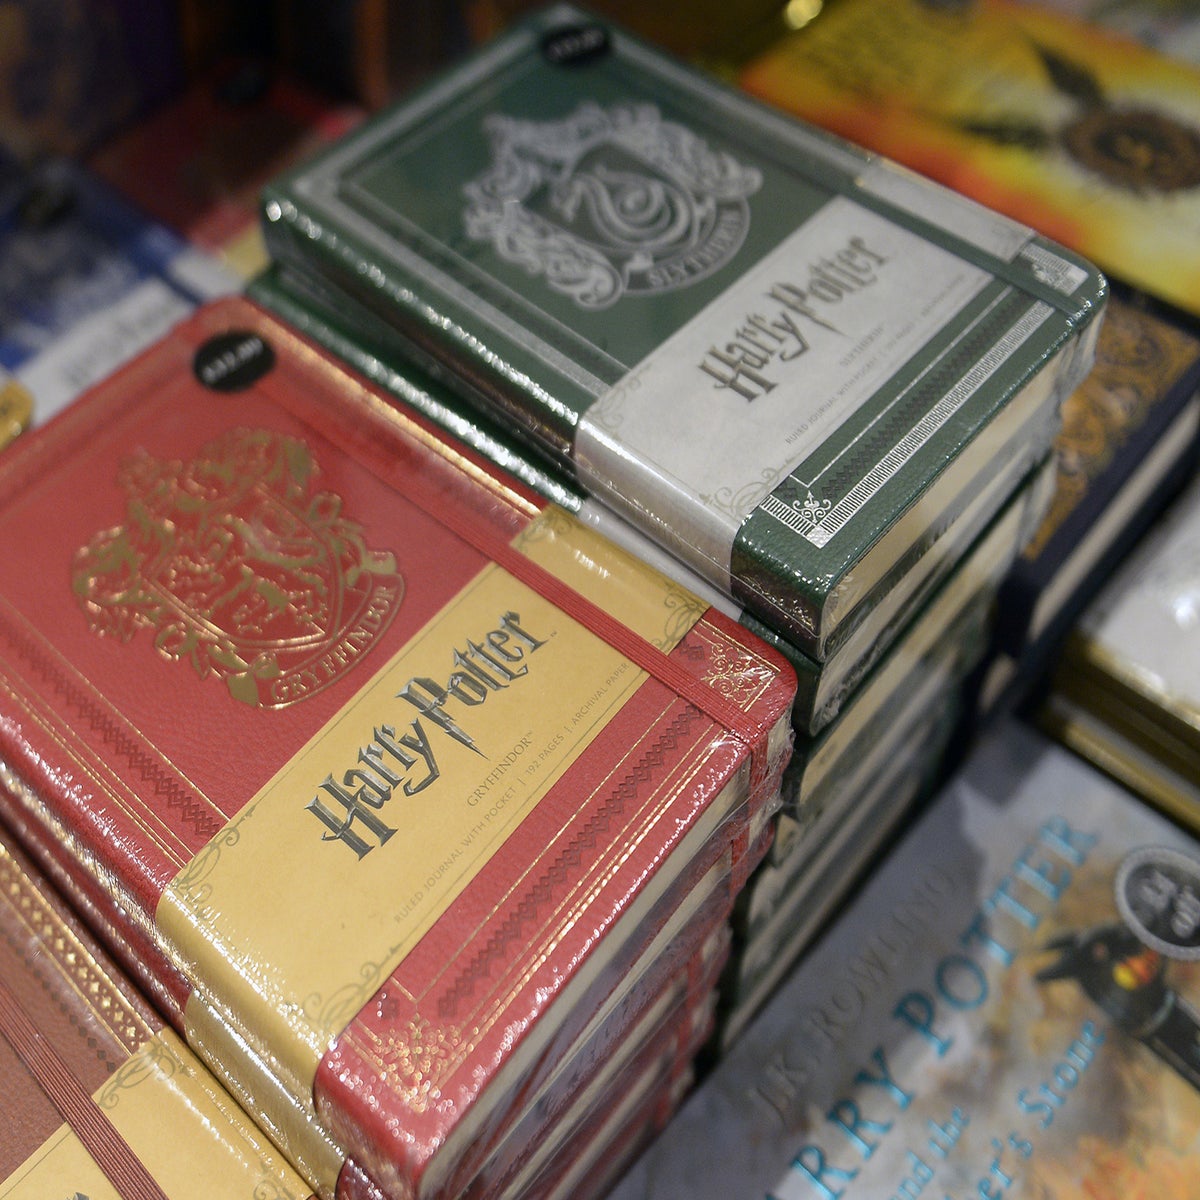 Limited Edition 20th Anniversary Harry Potter Box